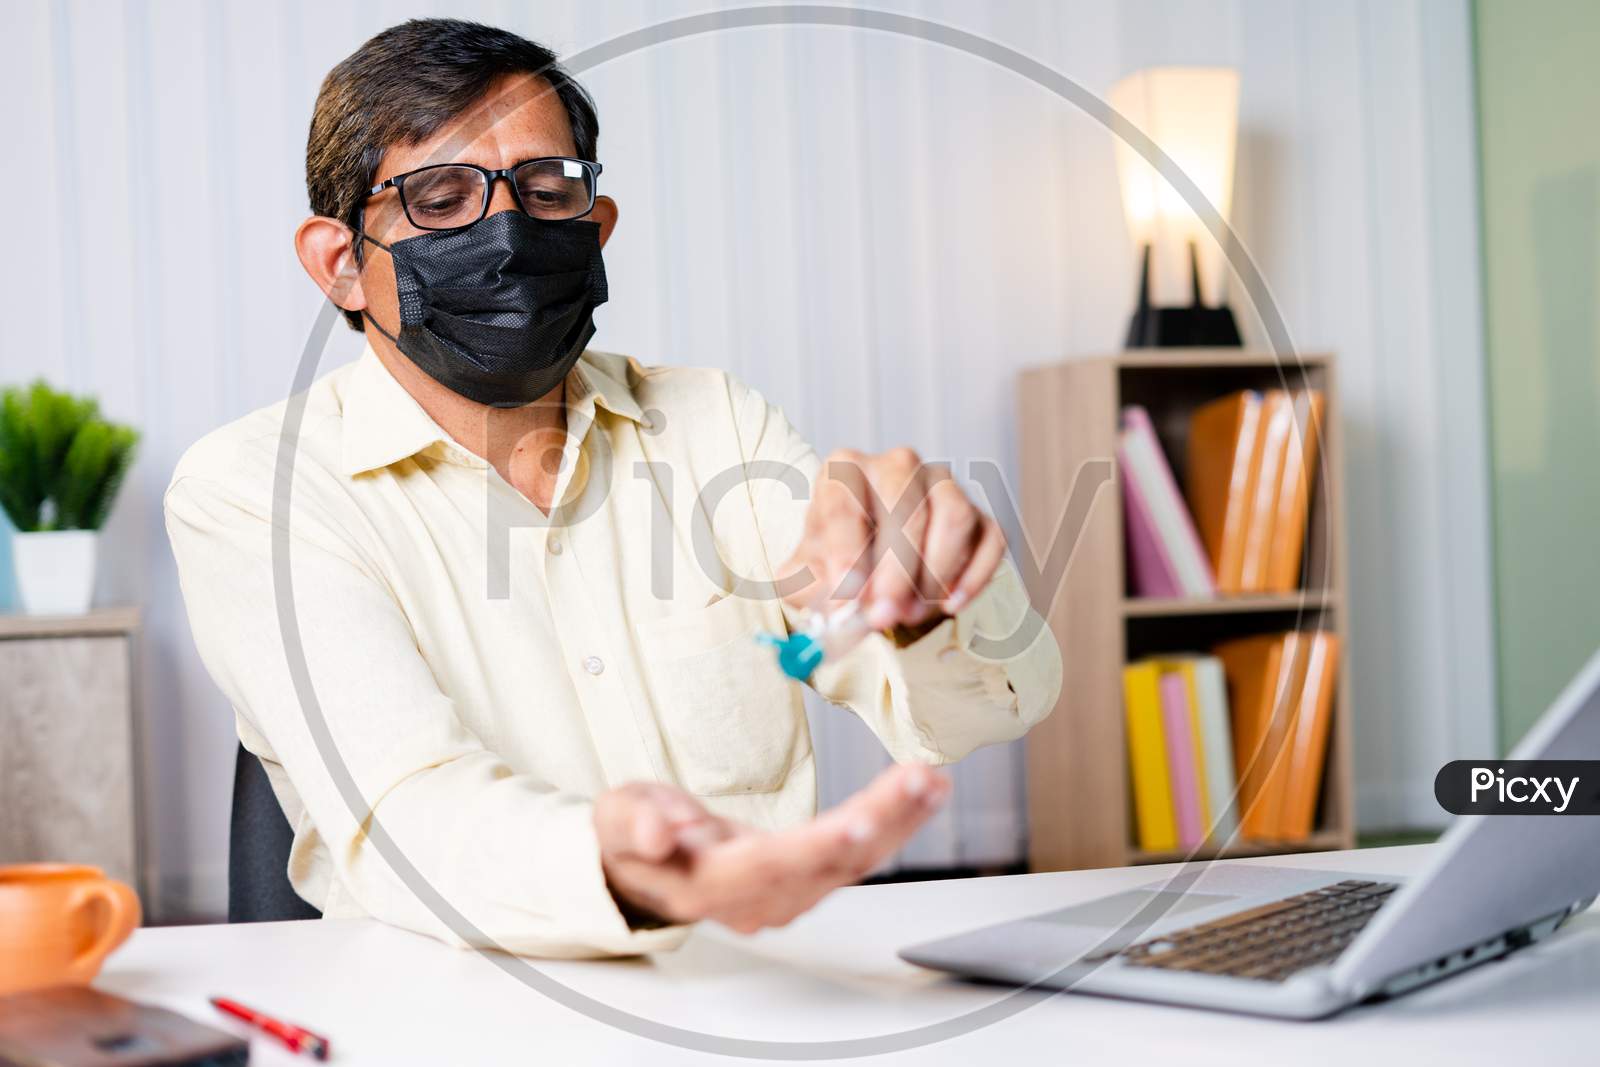 Businessman At Office With Medical Mask Using Hand Sanitizer Before Starting Work - Concept Of Office Reopen, New Normal And Coronavirus Covid-19 Safety Healthcare Measures.